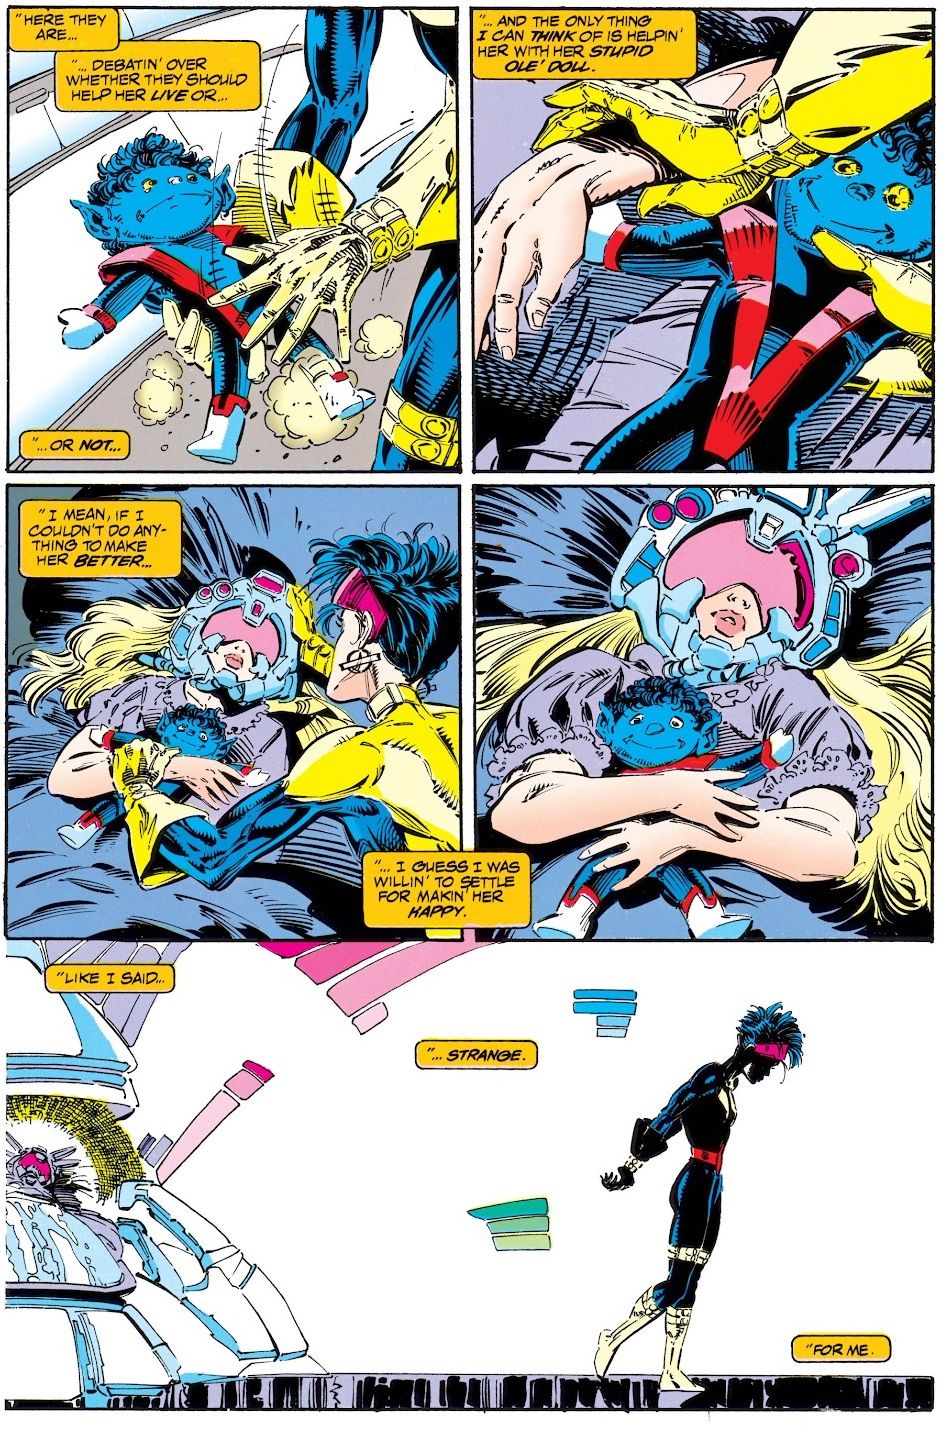 Jubilee tries to make Illyana's time more comfortable